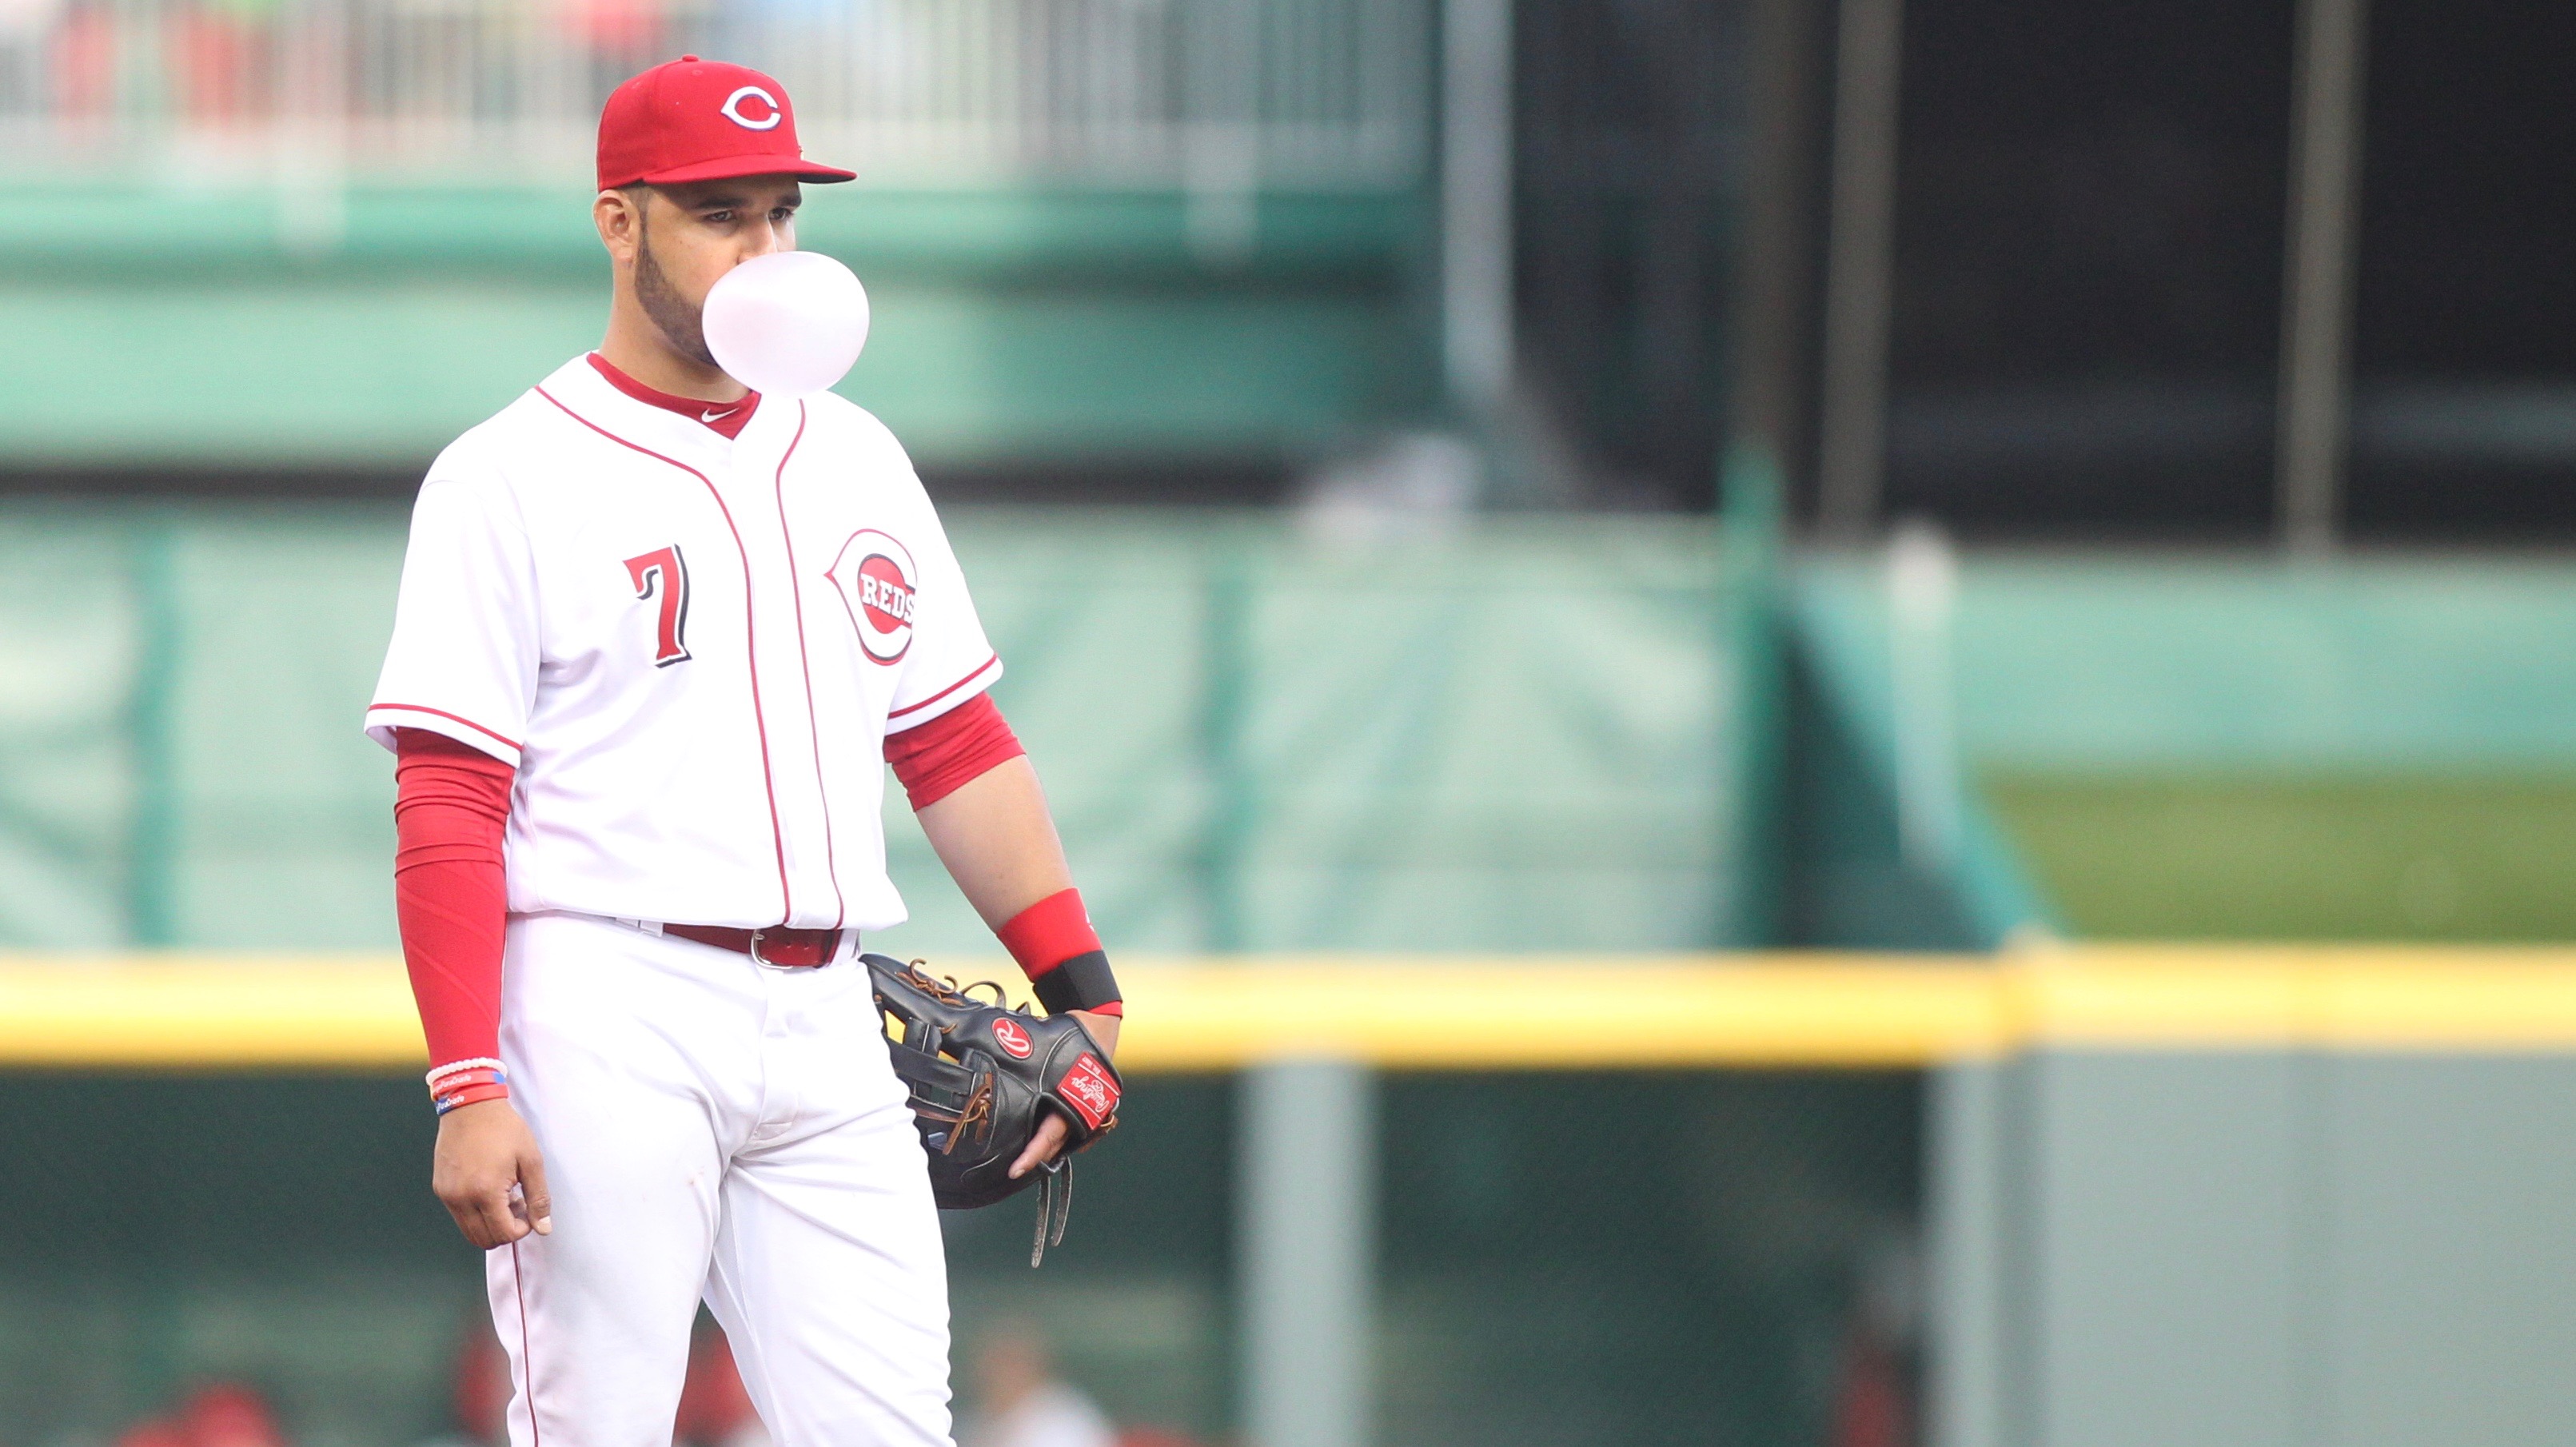 Take a look at some of Eugenio Suarez's best bubbles